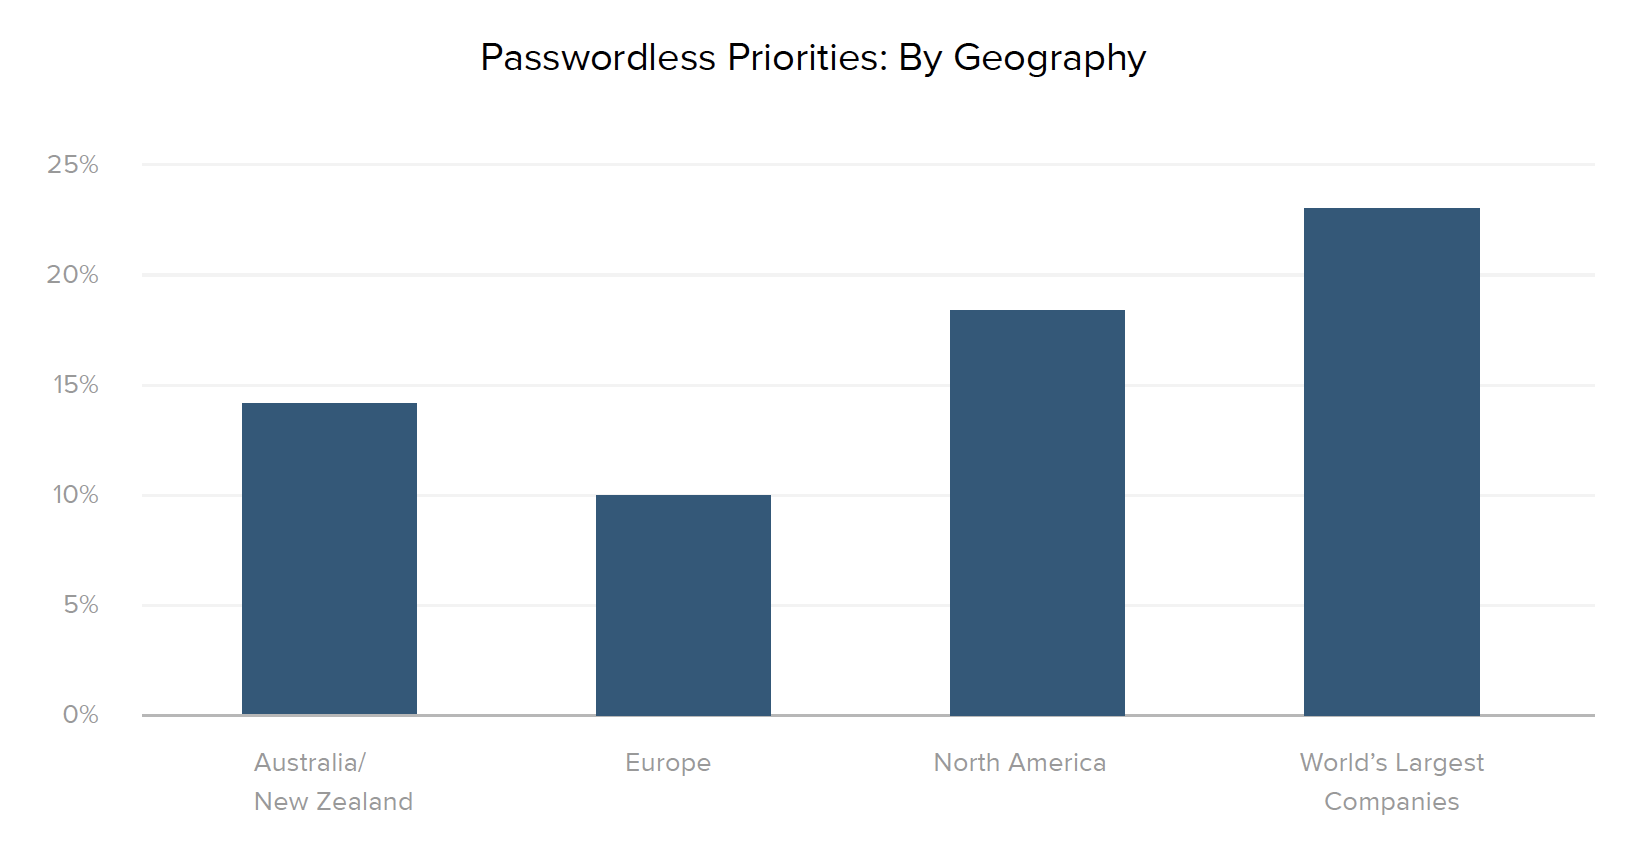 Passwordless Priorities: By Geography